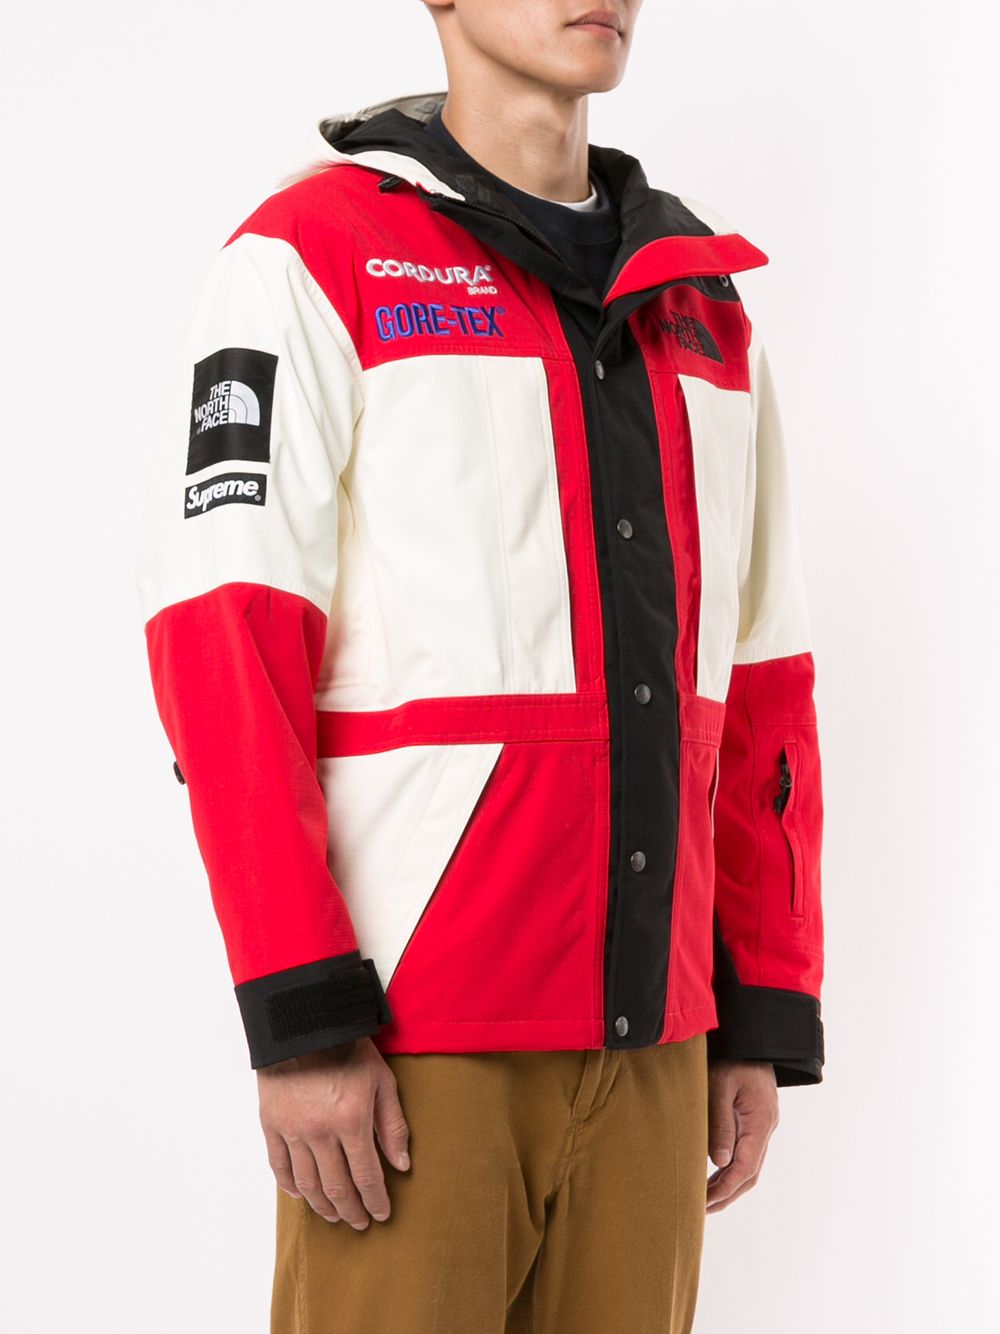 x The North Face Expedition jacket